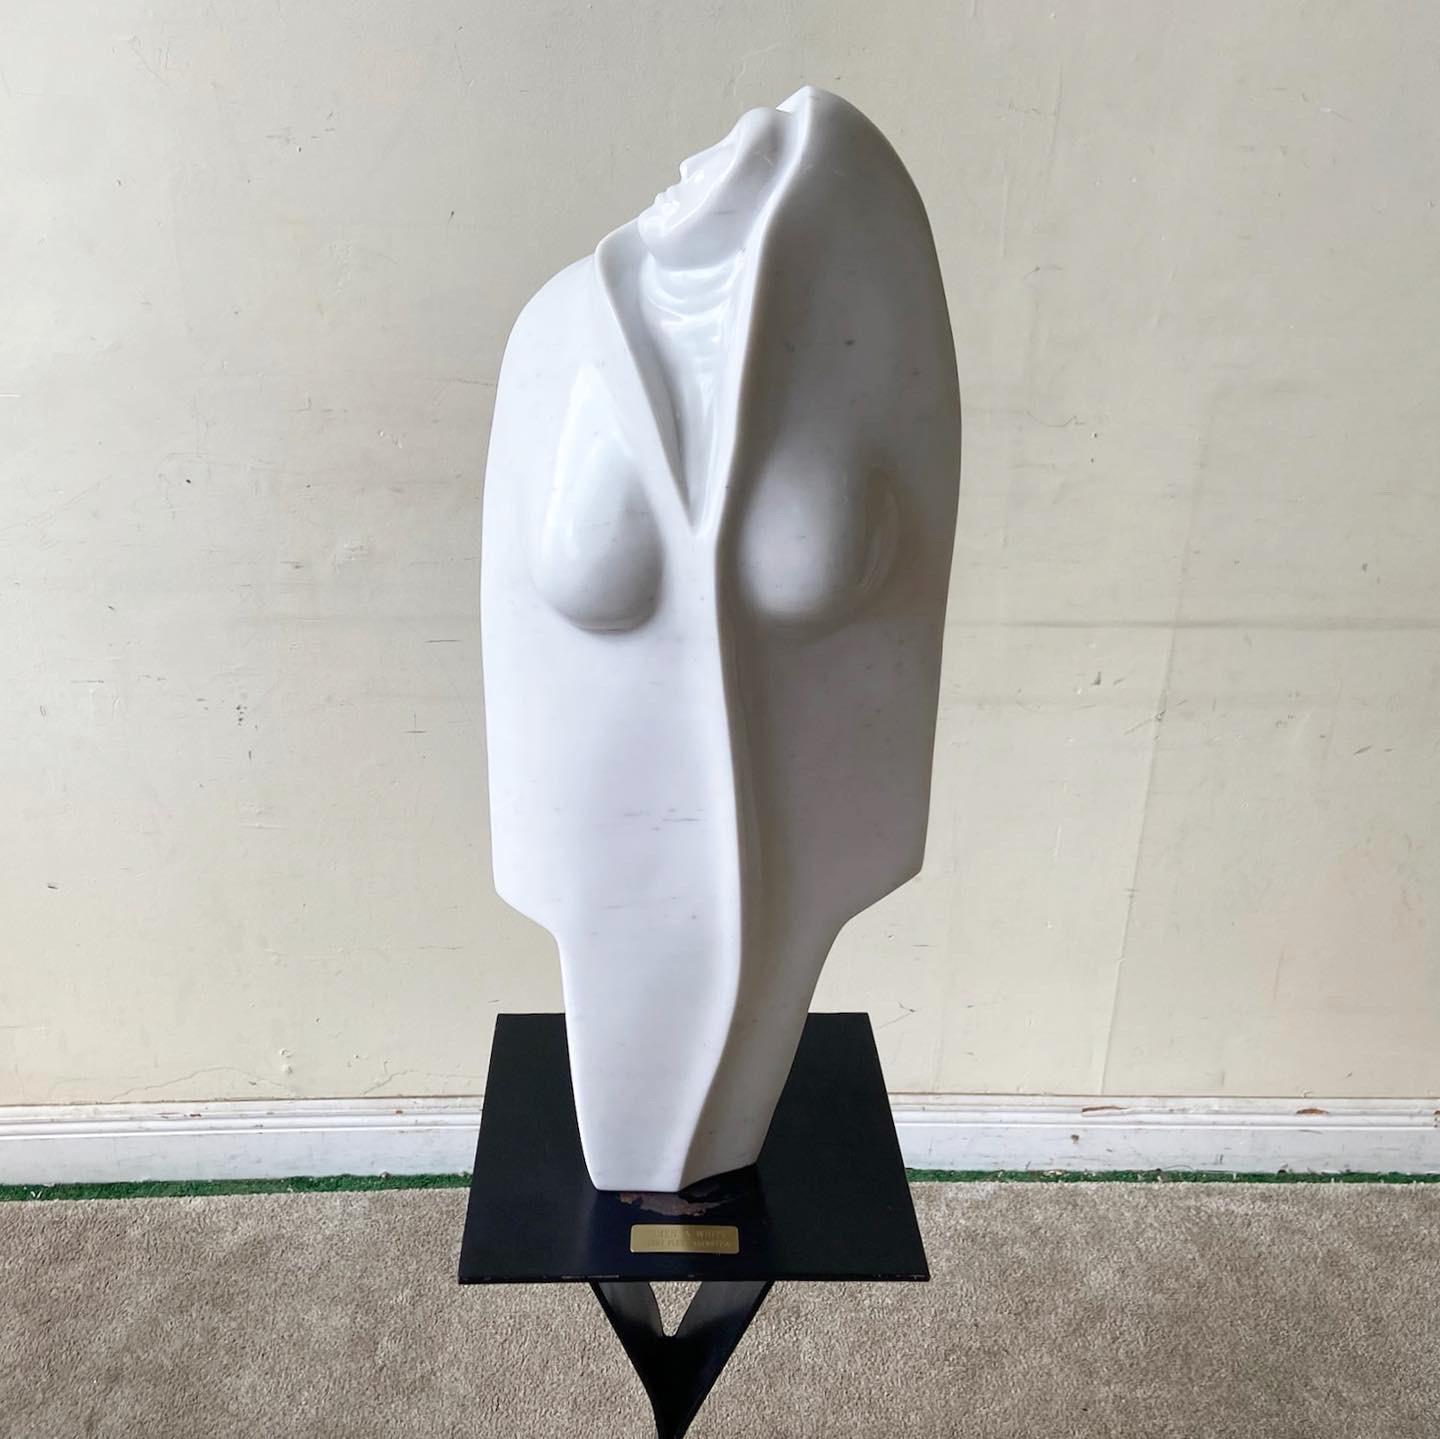 Exceptional postmodern white marble sculpture. Titled “Woman in White”, is displays an abstract female figure looking upward.
